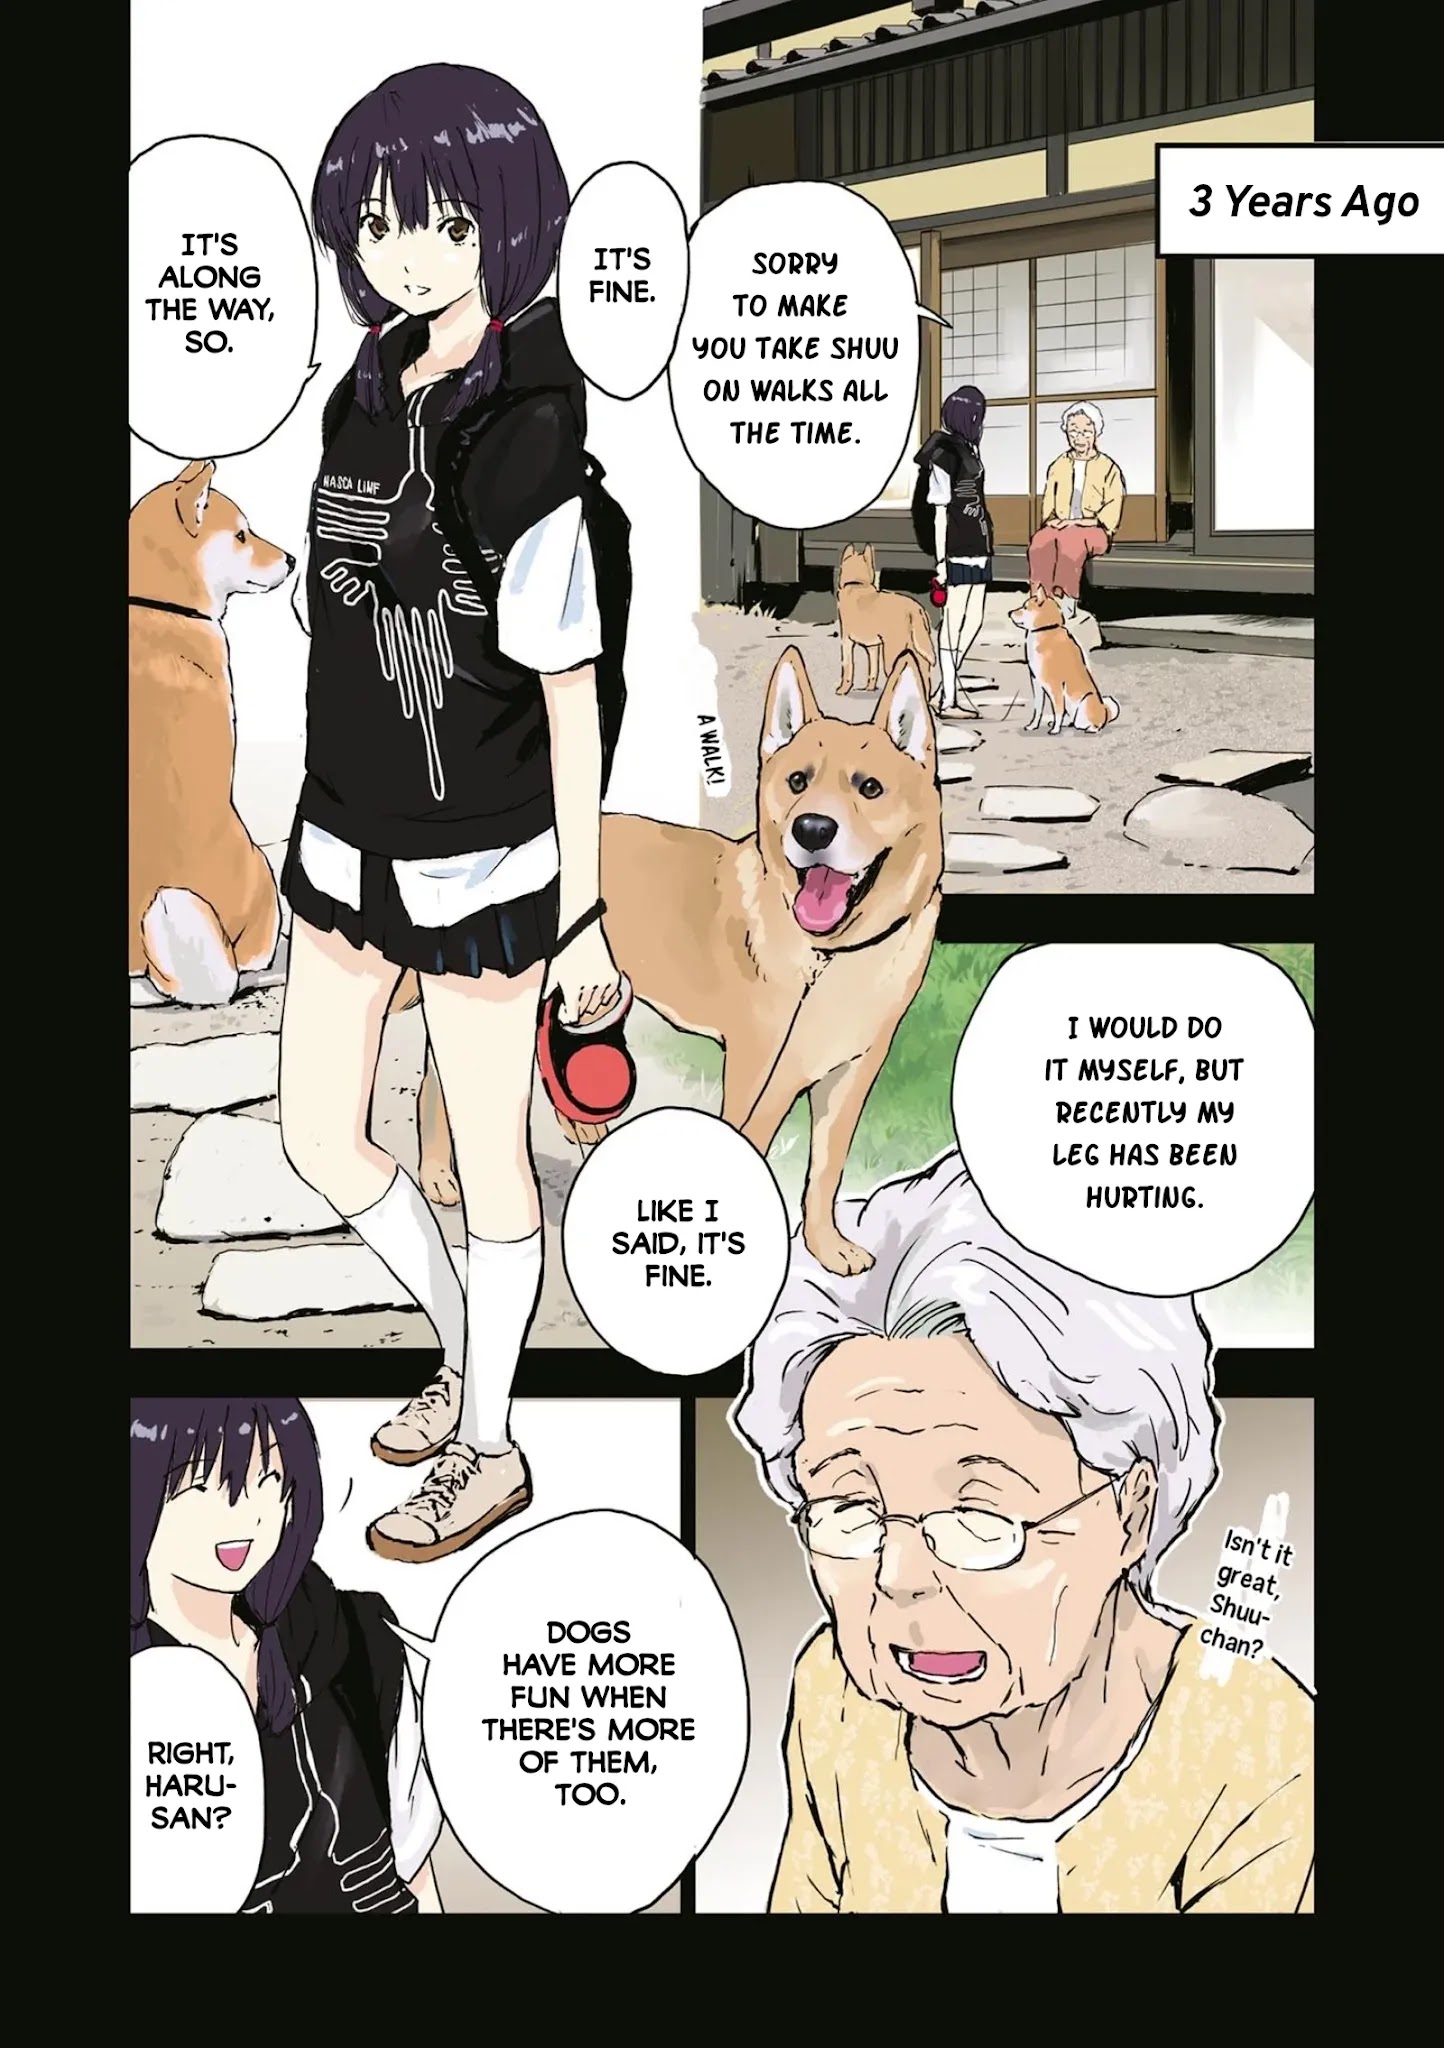 Roaming The Apocalypse With My Shiba Inu - chapter 35.5 - #5